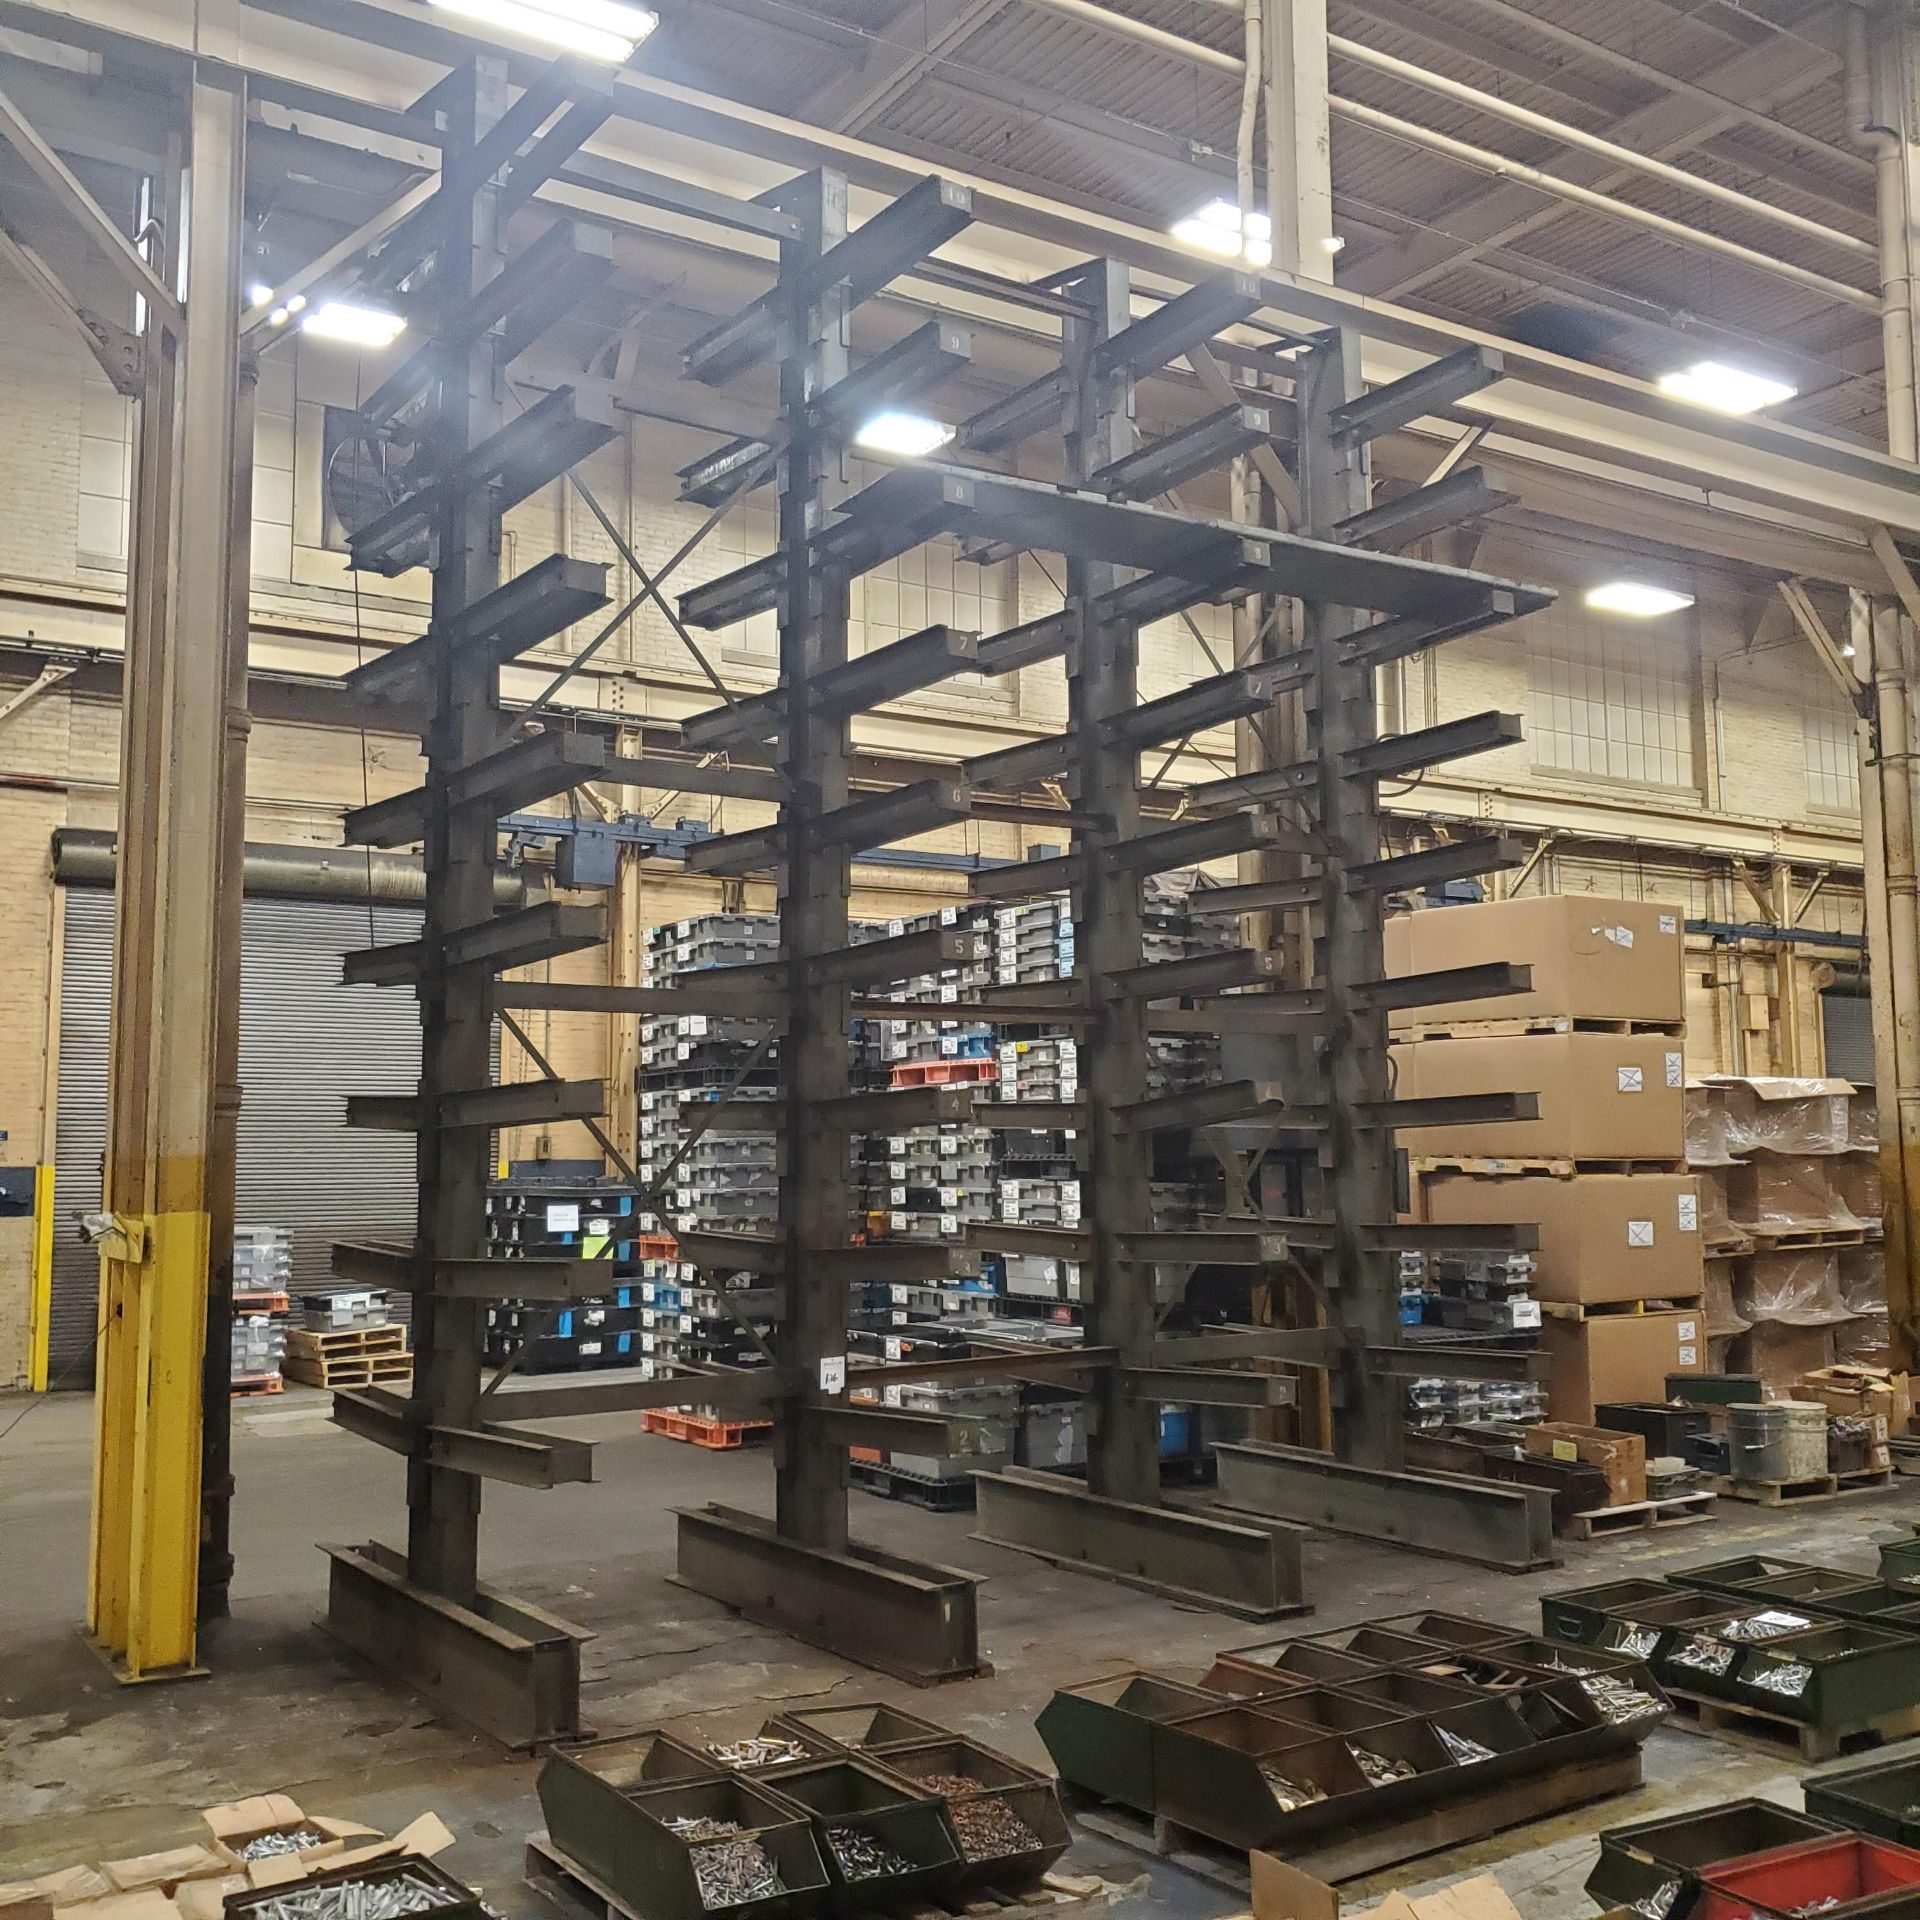 Double Sided 4 Column Material Rack 14' High x 16' Wide w/64 34" Adjustable Arms, 82" Deep, - Image 2 of 2